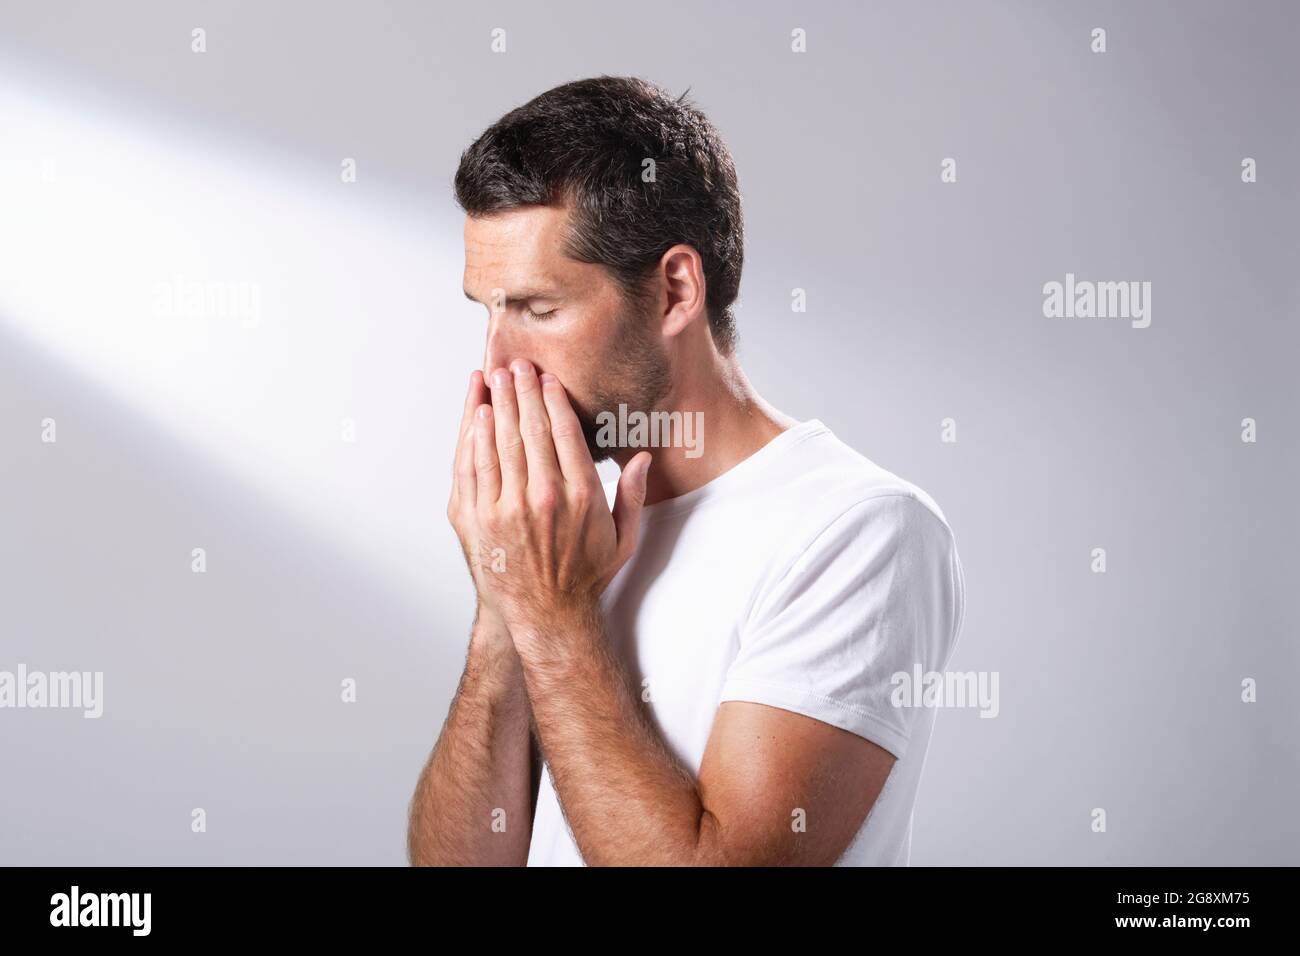 Man using a facial oil to massage in to his skin. Stock Photo